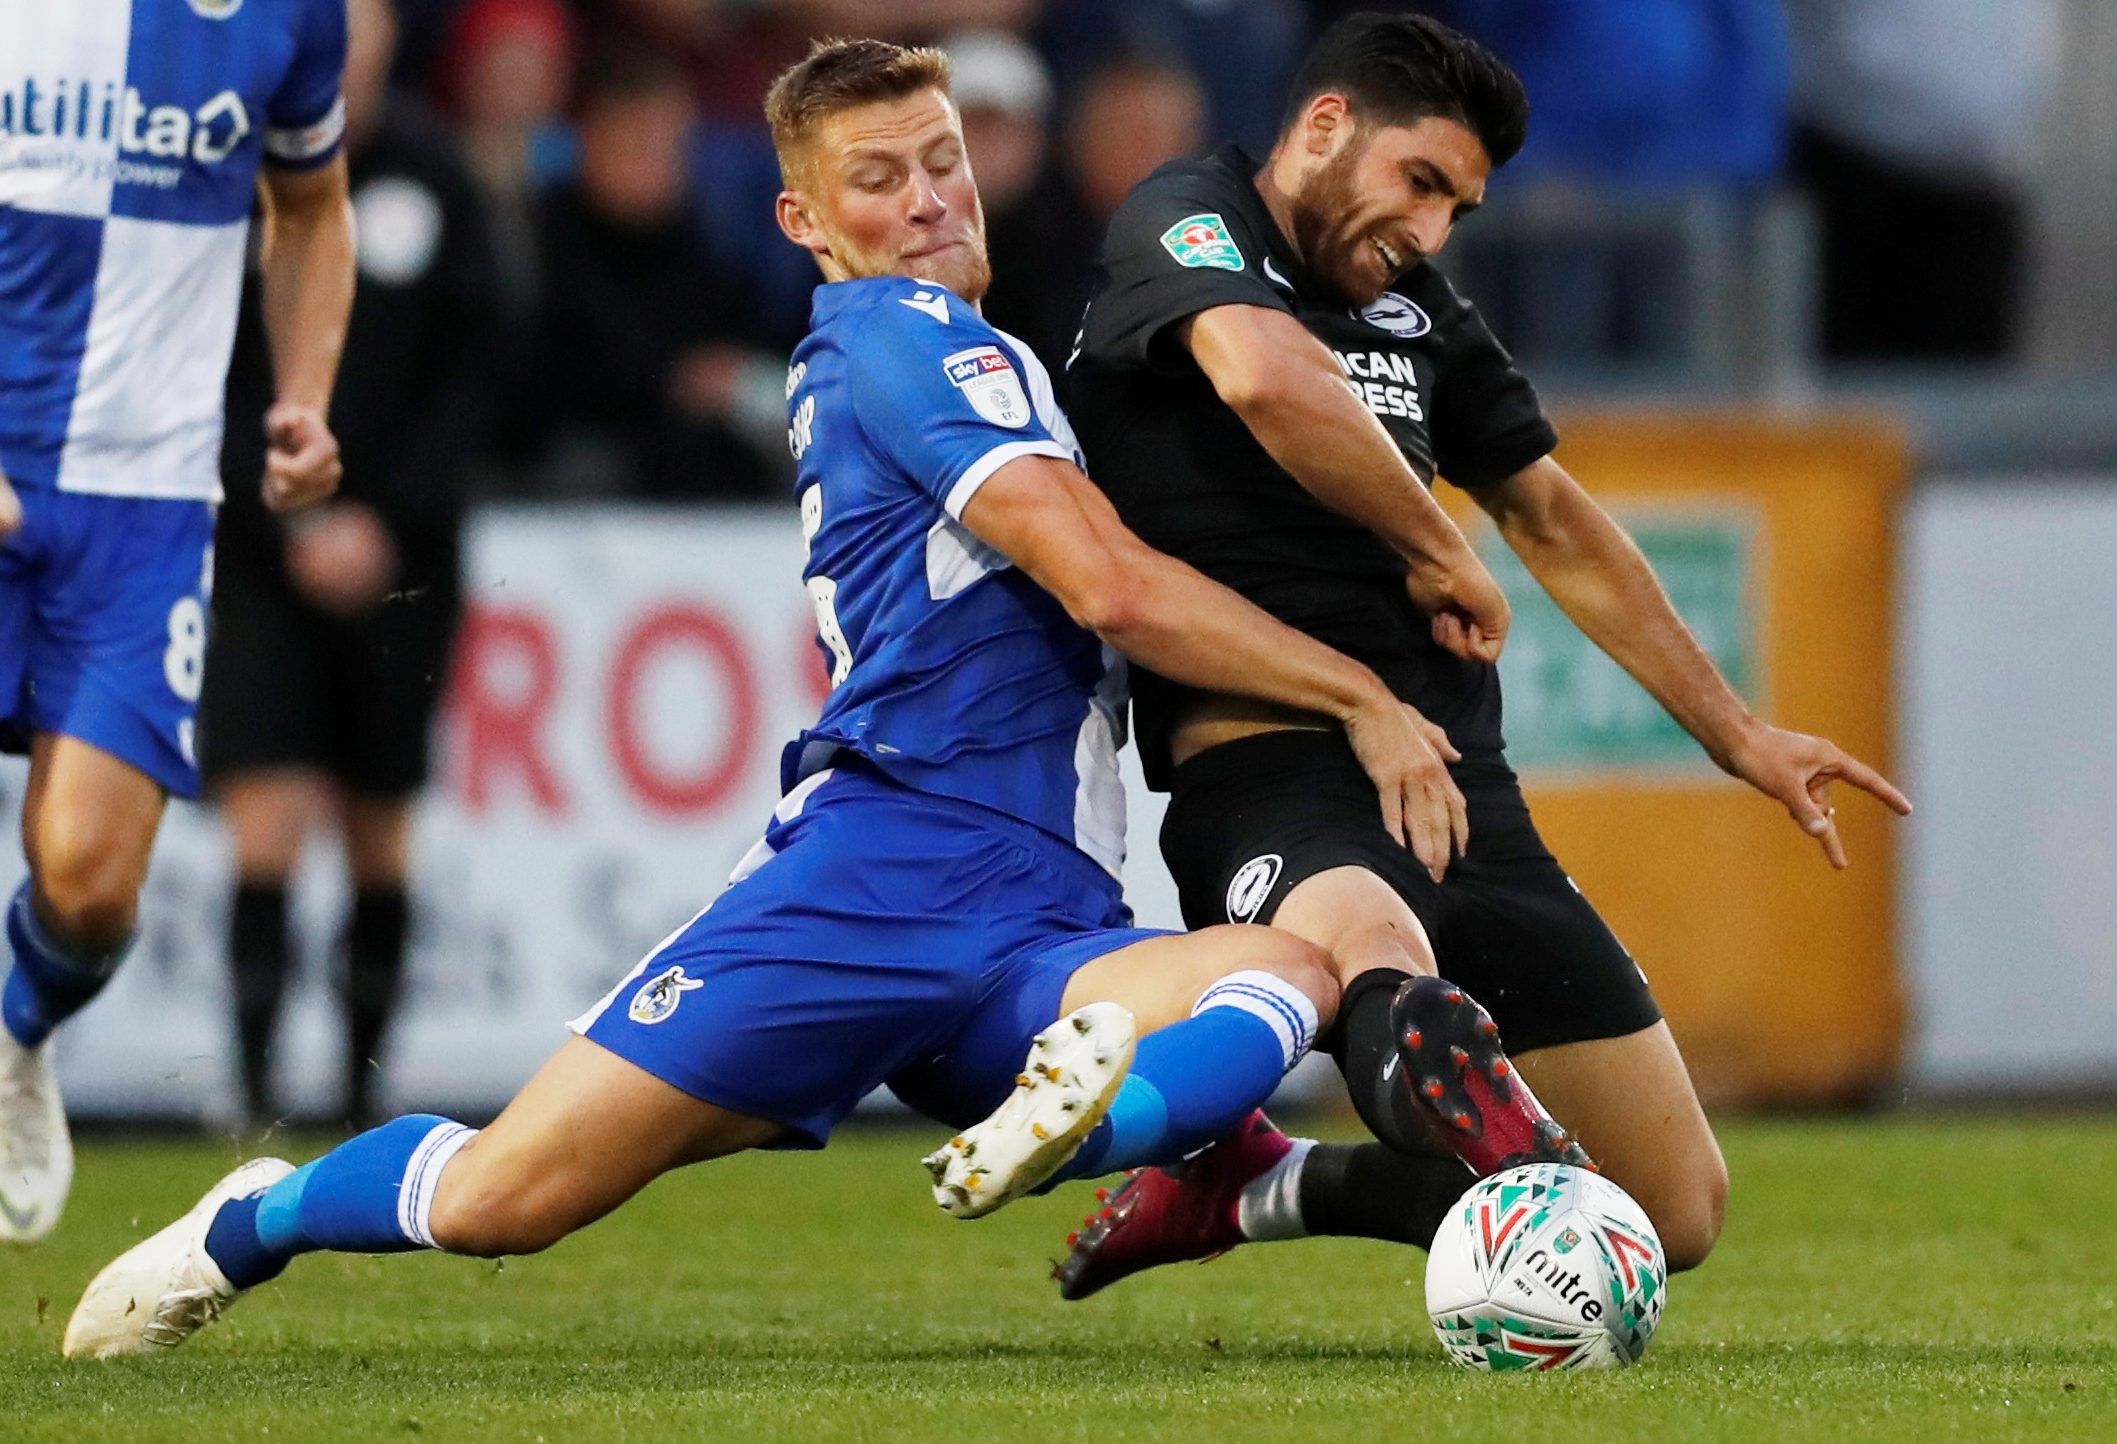 Soccer Football - Carabao Cup Second Round - Bristol Rovers v Brighton &amp; Hove Albion - Memorial Stadium, Bristol, Britain - August 27, 2019  Brighton and Hove Albion's Alireza Jahanbakhsh in action with Bristol Rovers' Alfie Kilgour   Action Images via Reuters/Matthew Childs  EDITORIAL USE ONLY. No use with unauthorized audio, video, data, fixture lists, club/league logos or 